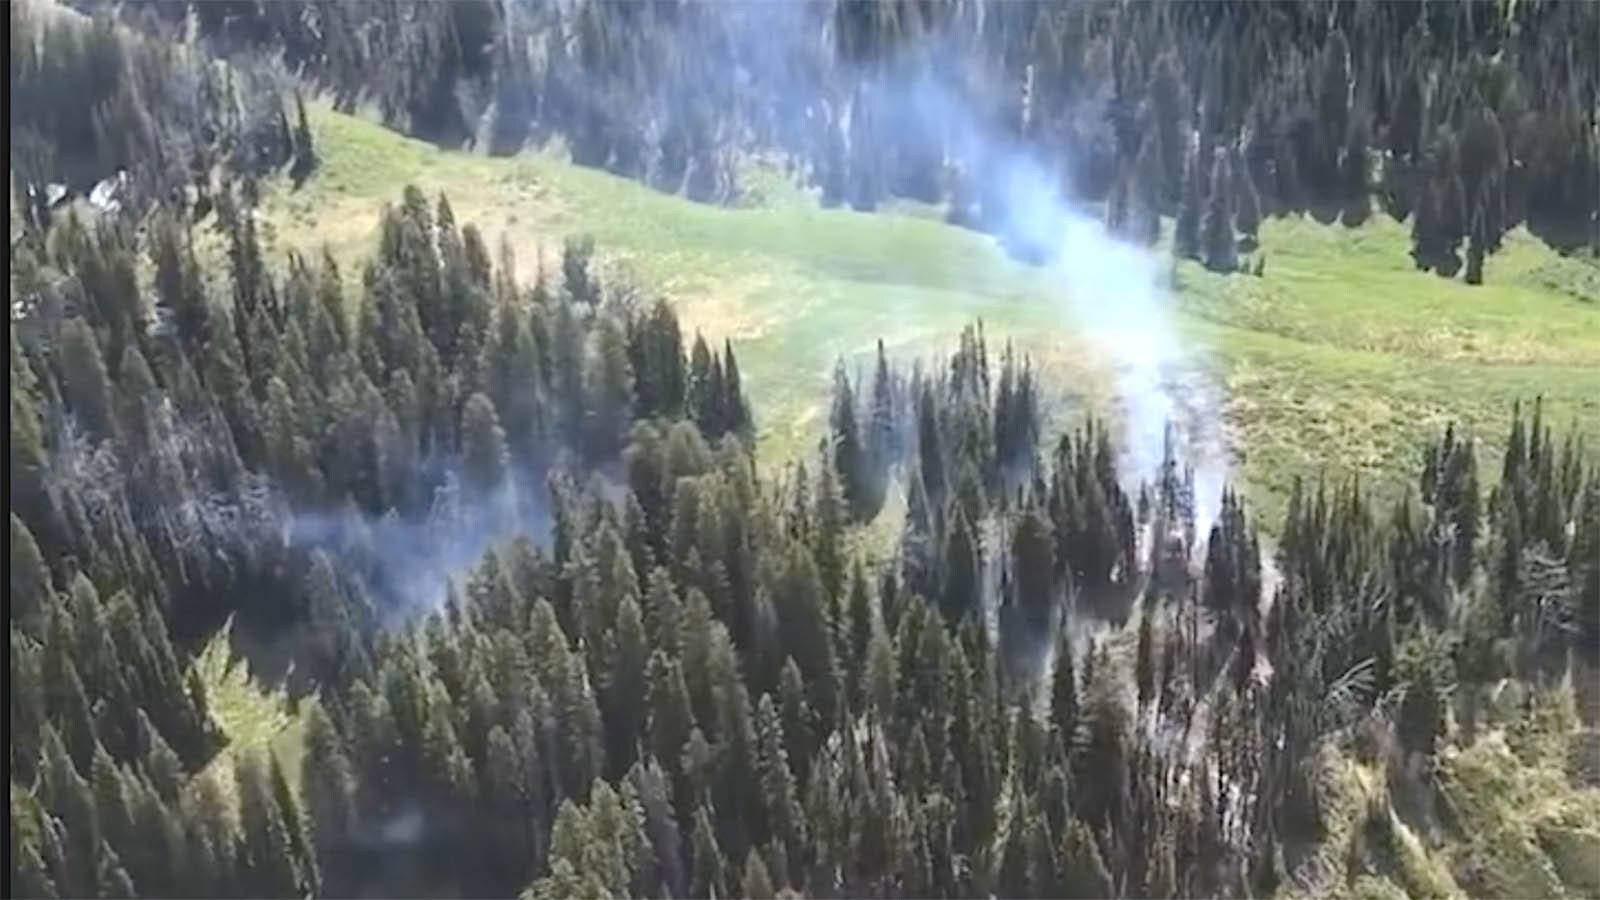 Horse Creek fire was discovered July 1 and is believed to be lightning caused.